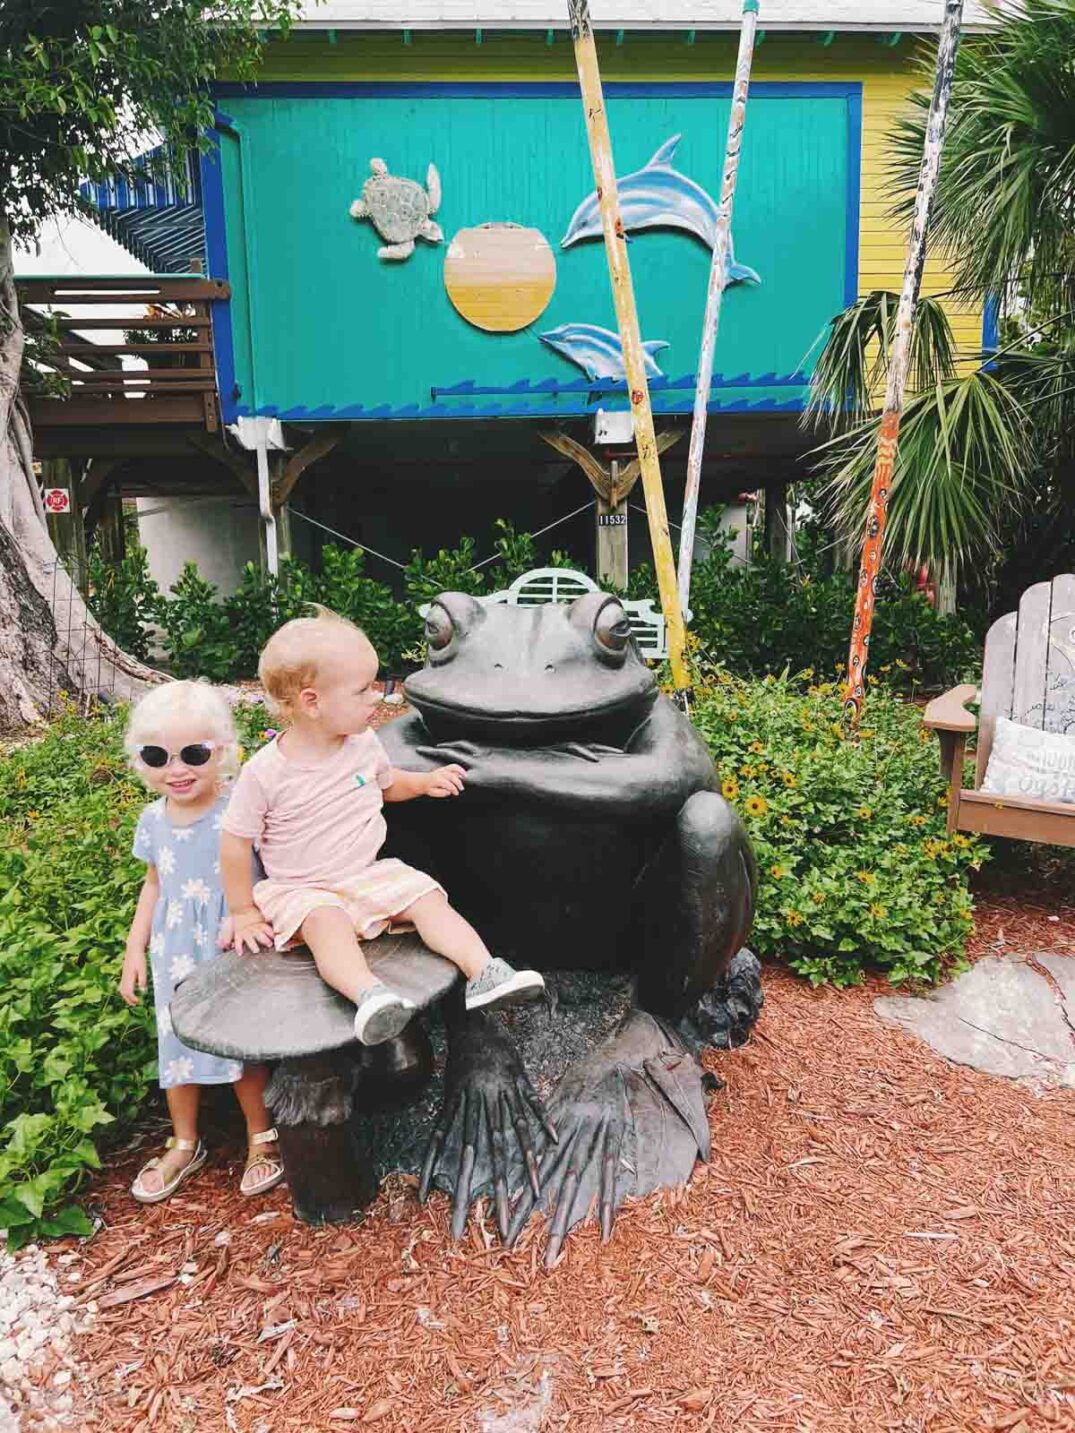 poppy johnston and jetty johnston on a large blue chair in captiva island.